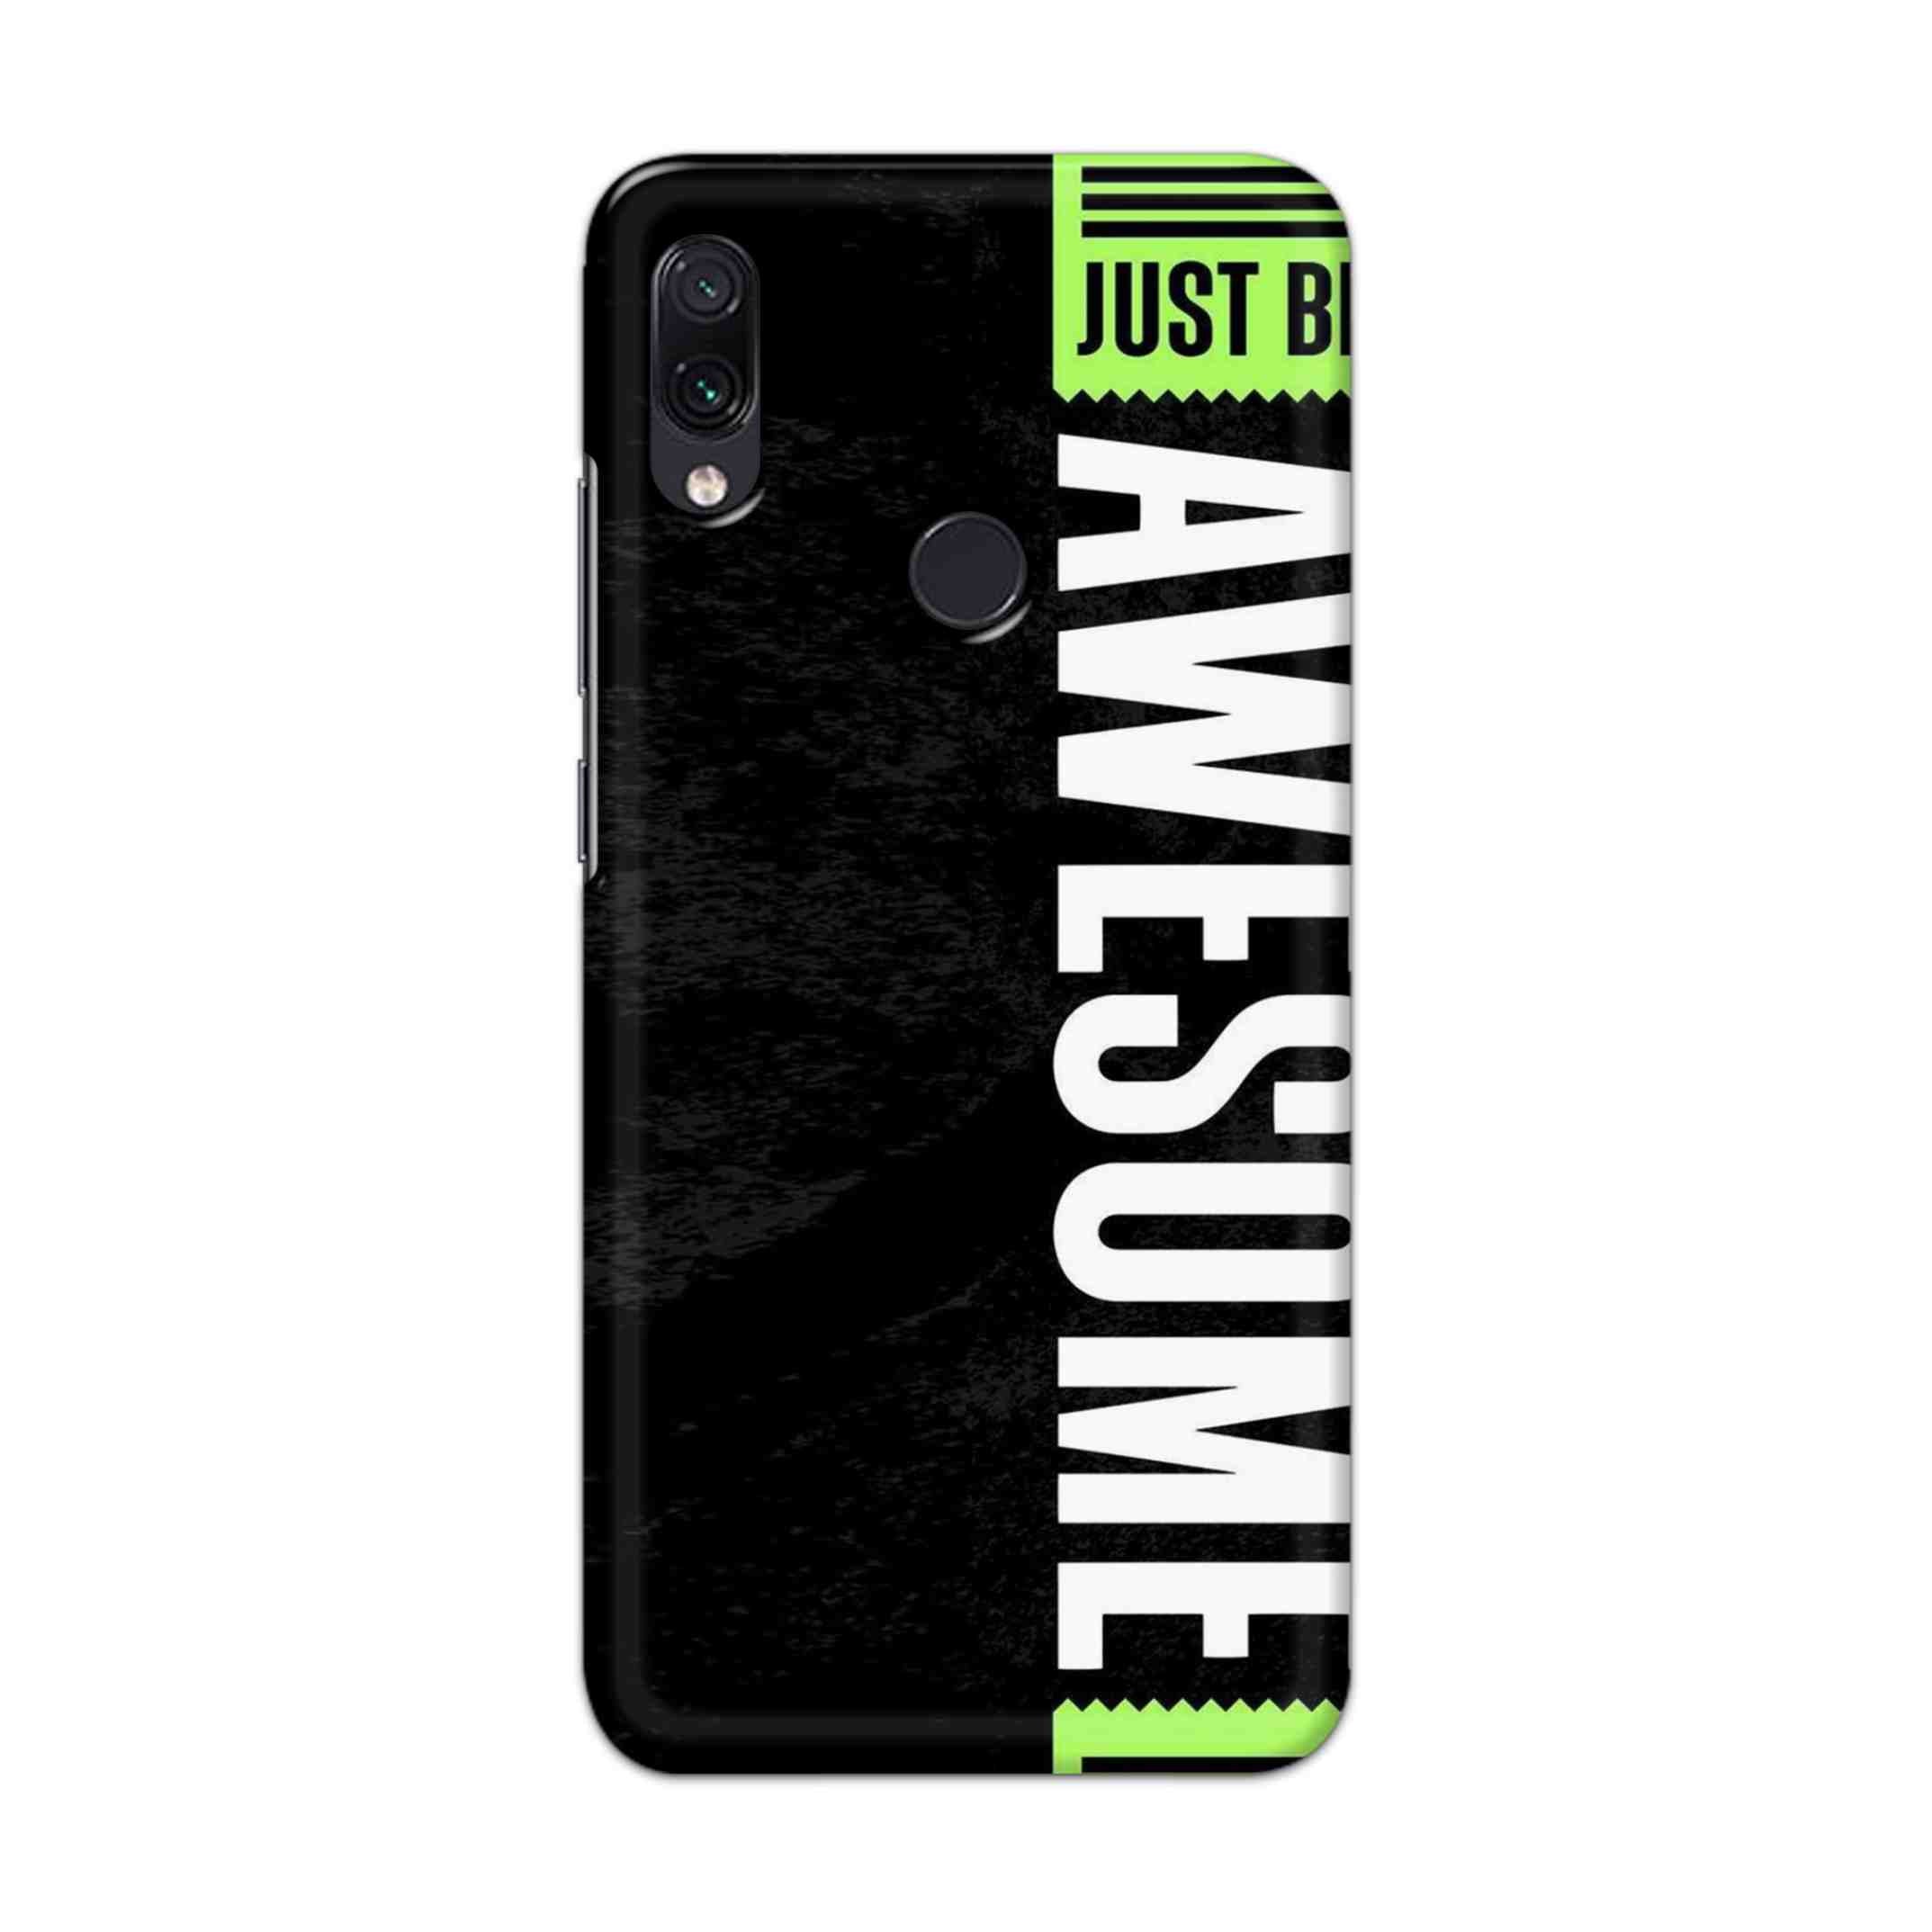 Buy Awesome Street Hard Back Mobile Phone Case Cover For Redmi Note 7 / Note 7 Pro Online